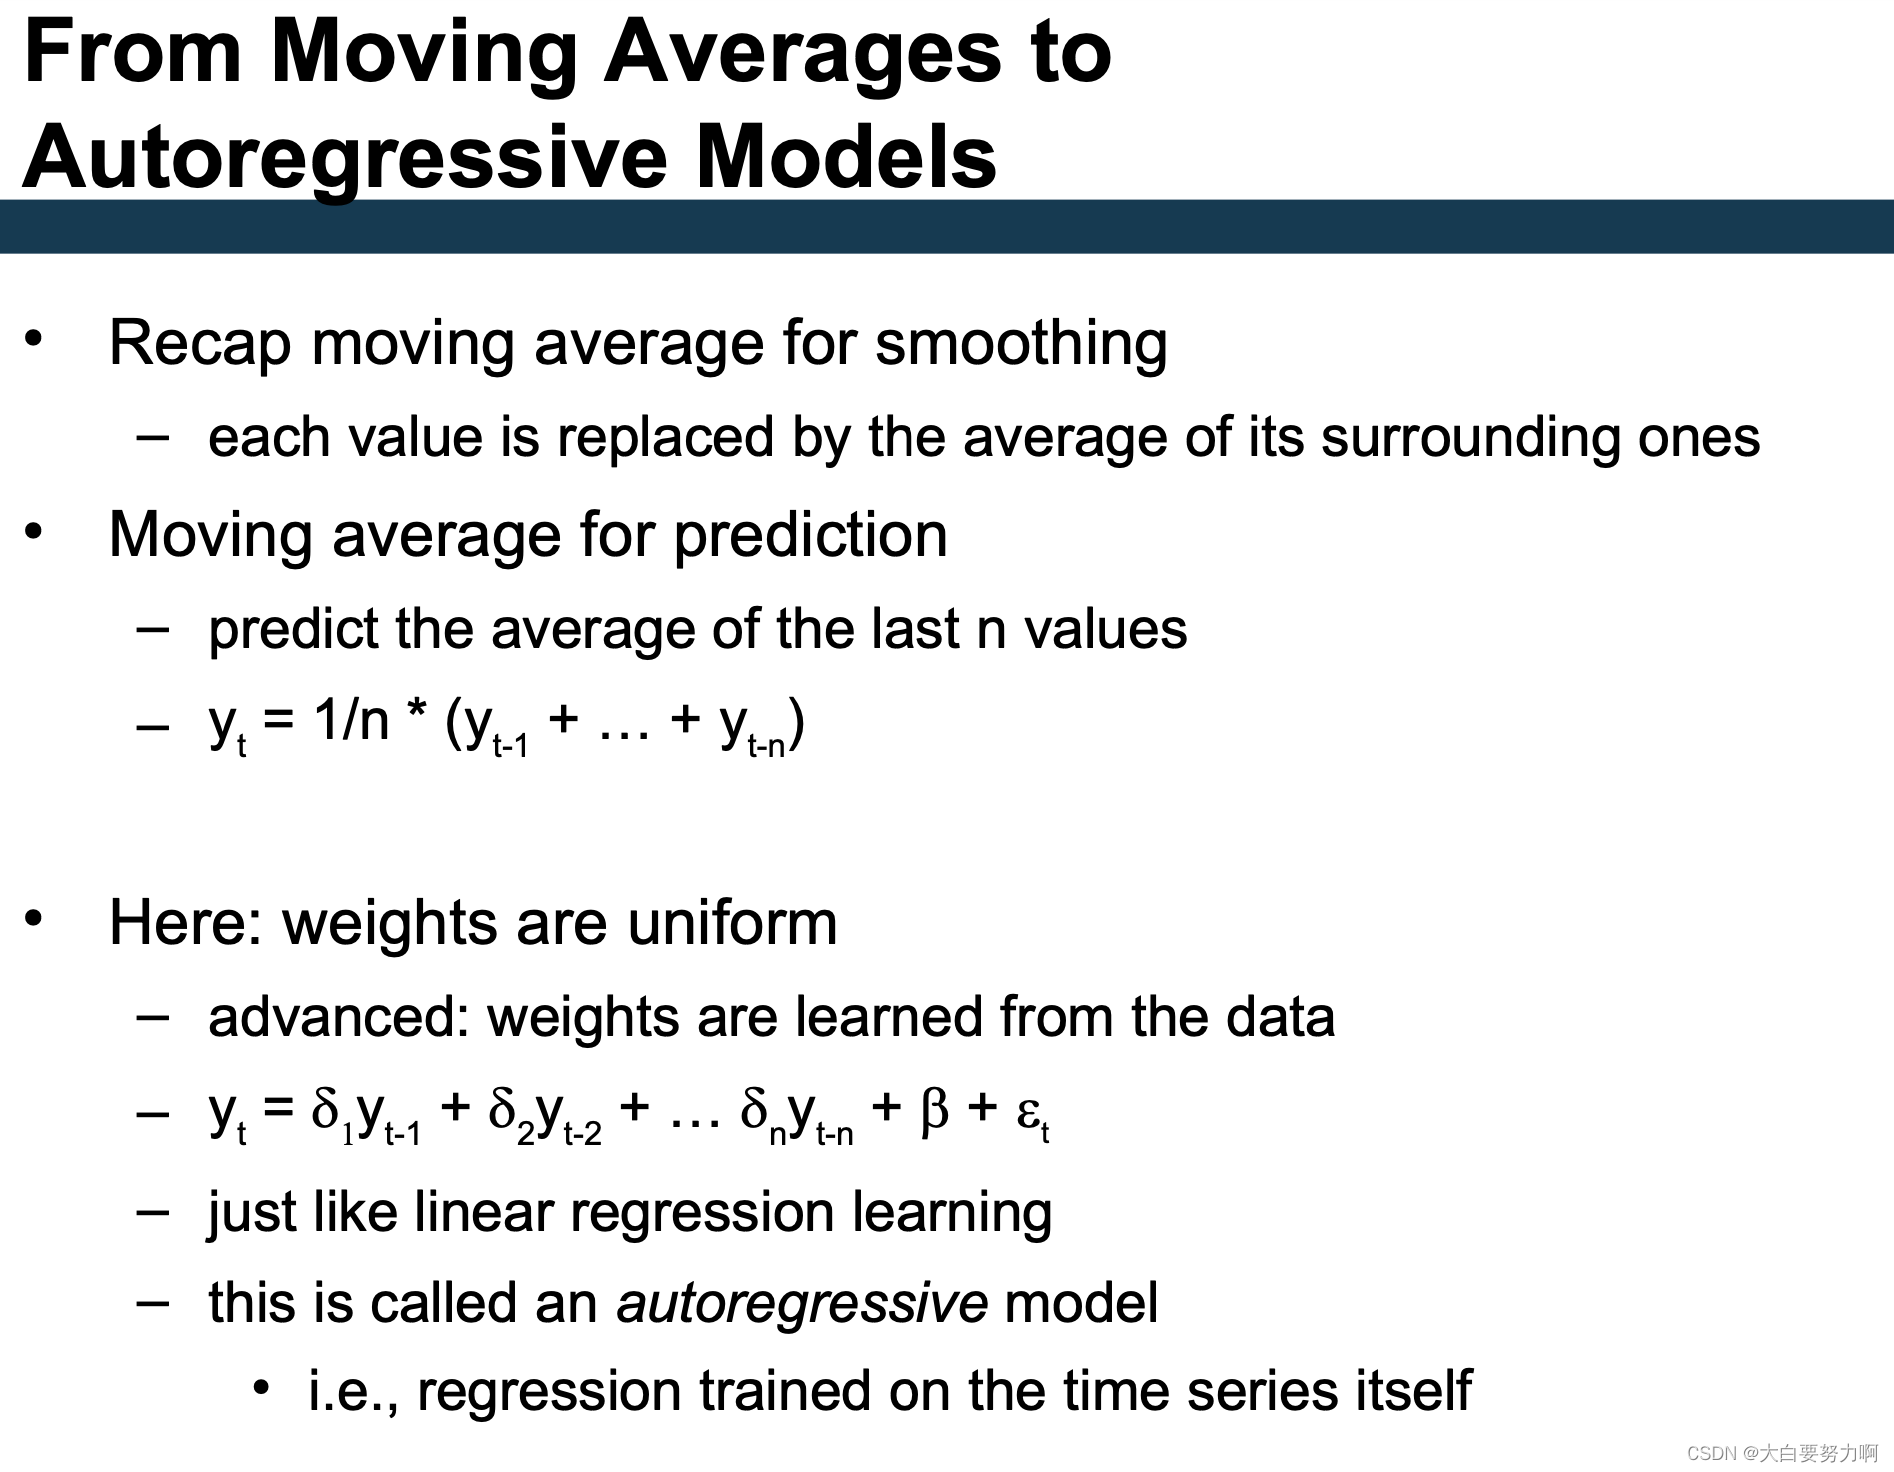 From Moving Averages to Autoregressive Models